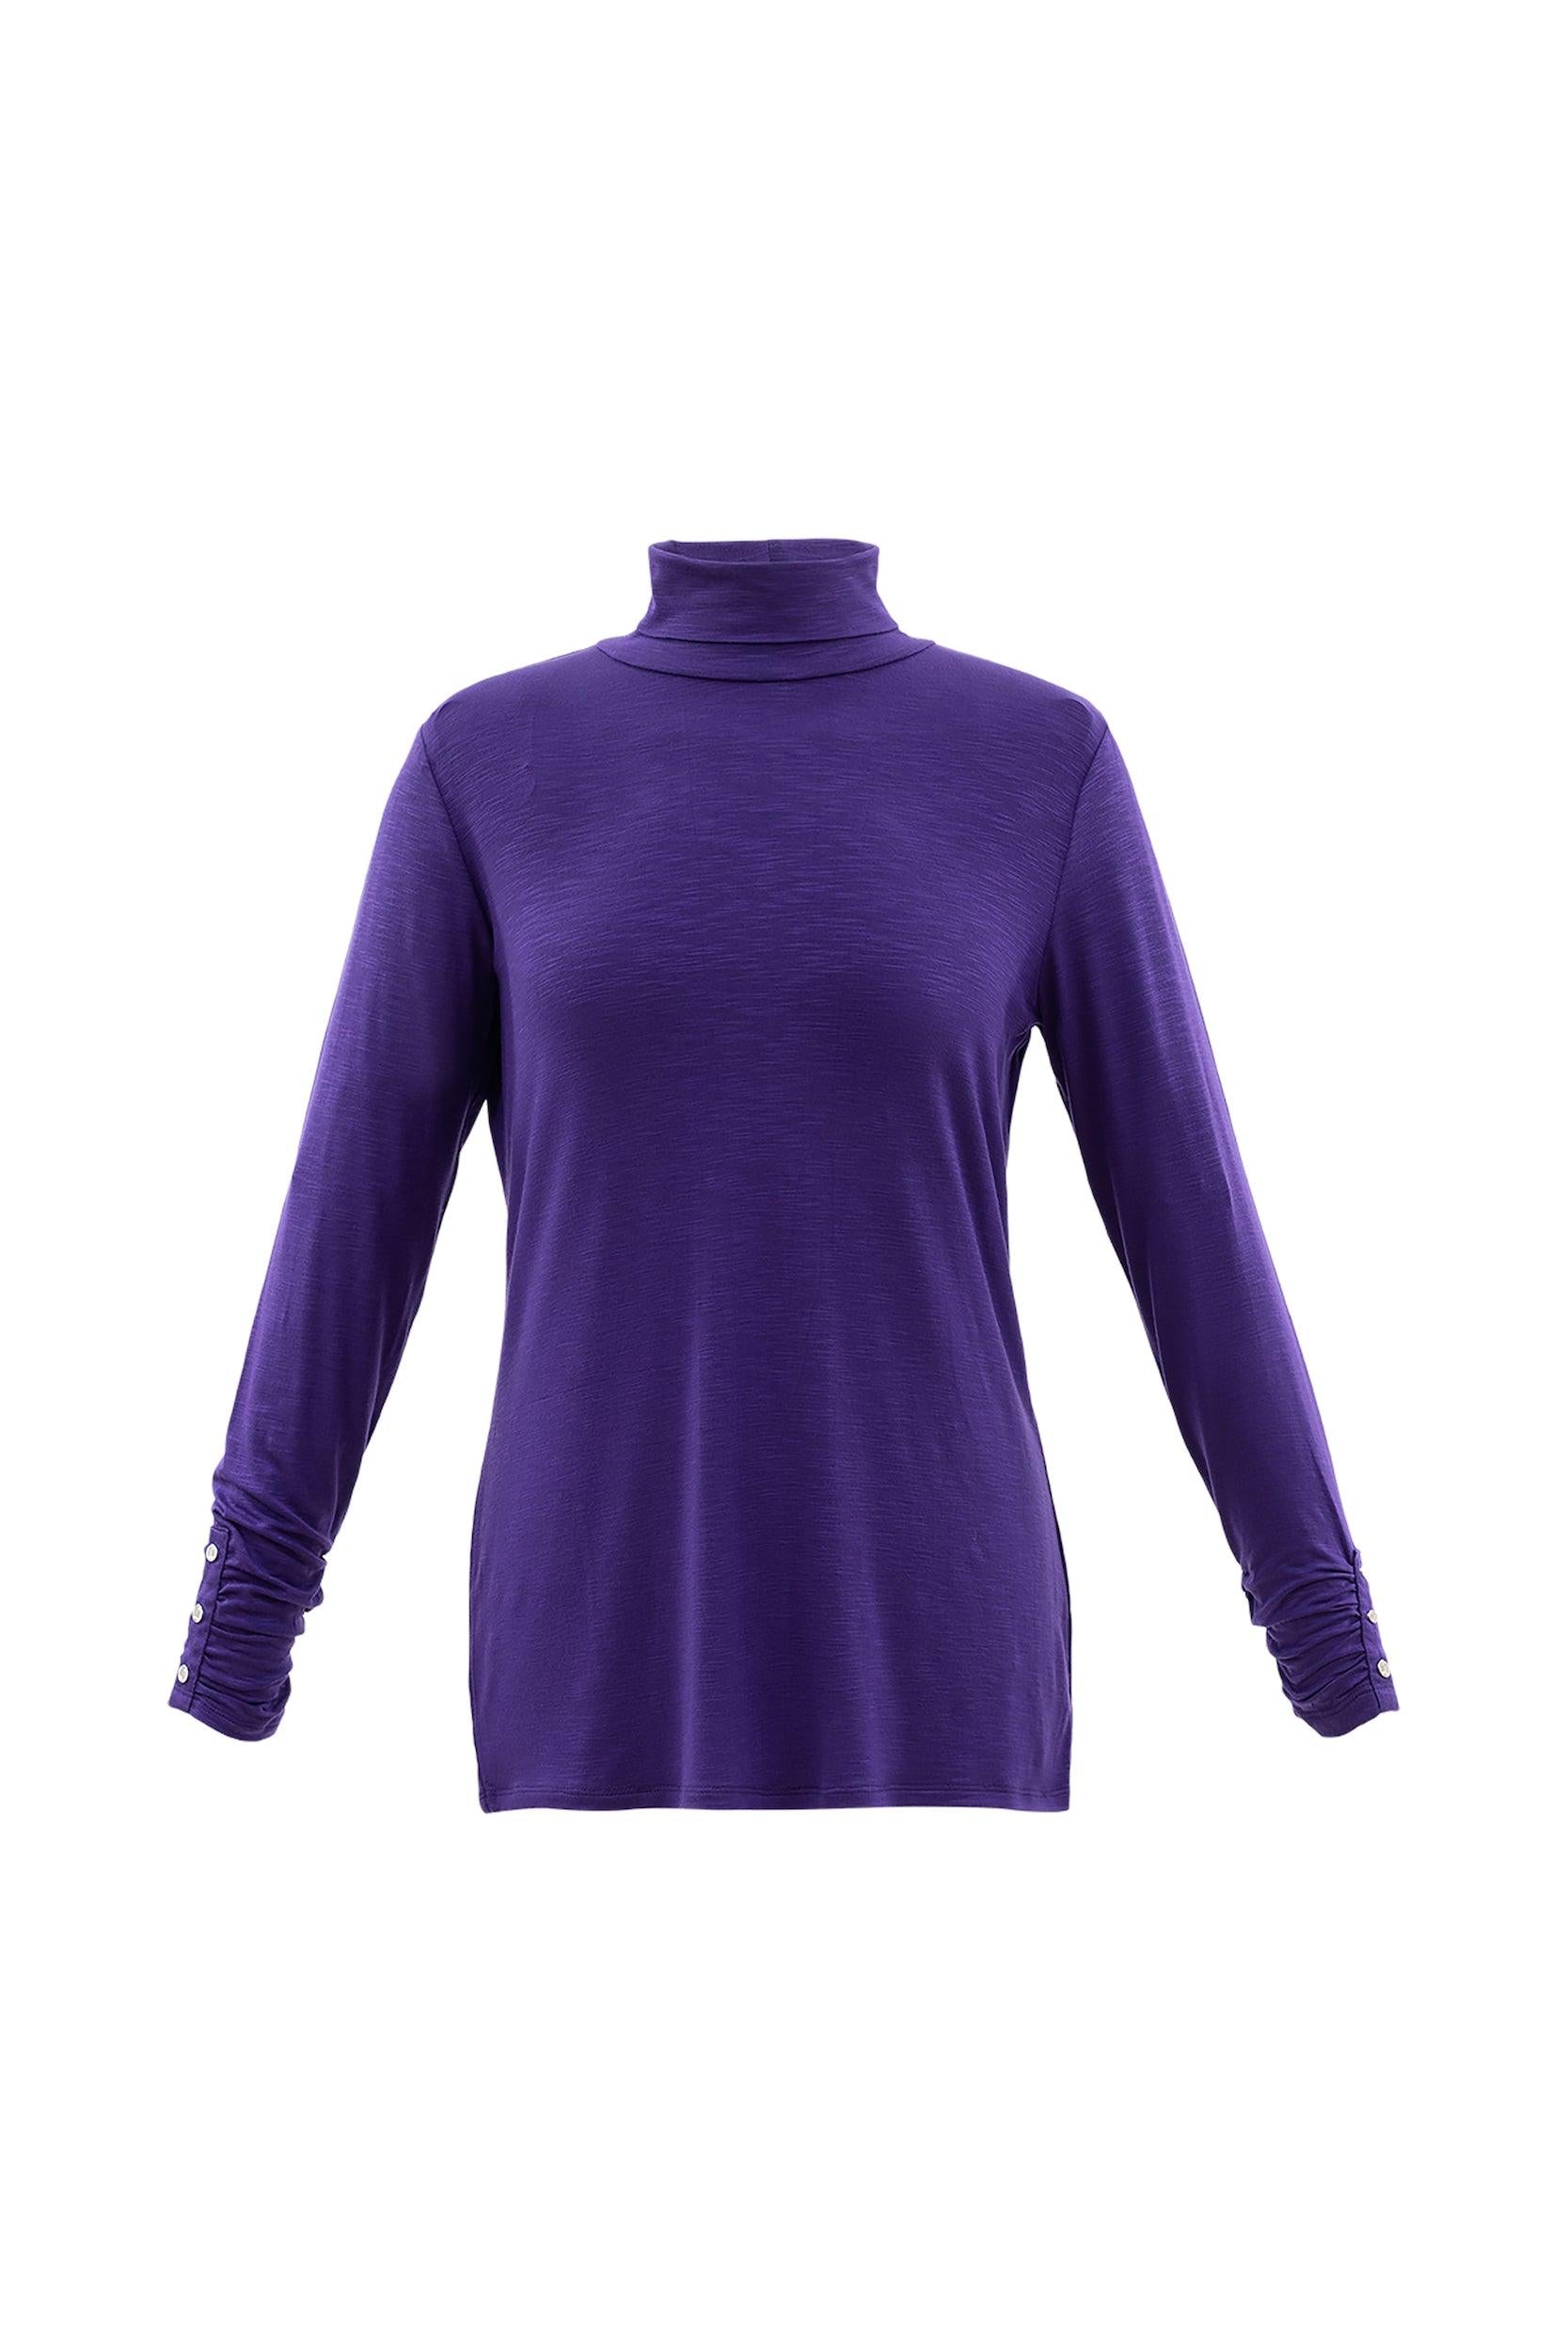 MARBLE SILKY KNIT TOP 5930 PURPLE freeshipping - Solitaire Fashions Darwen